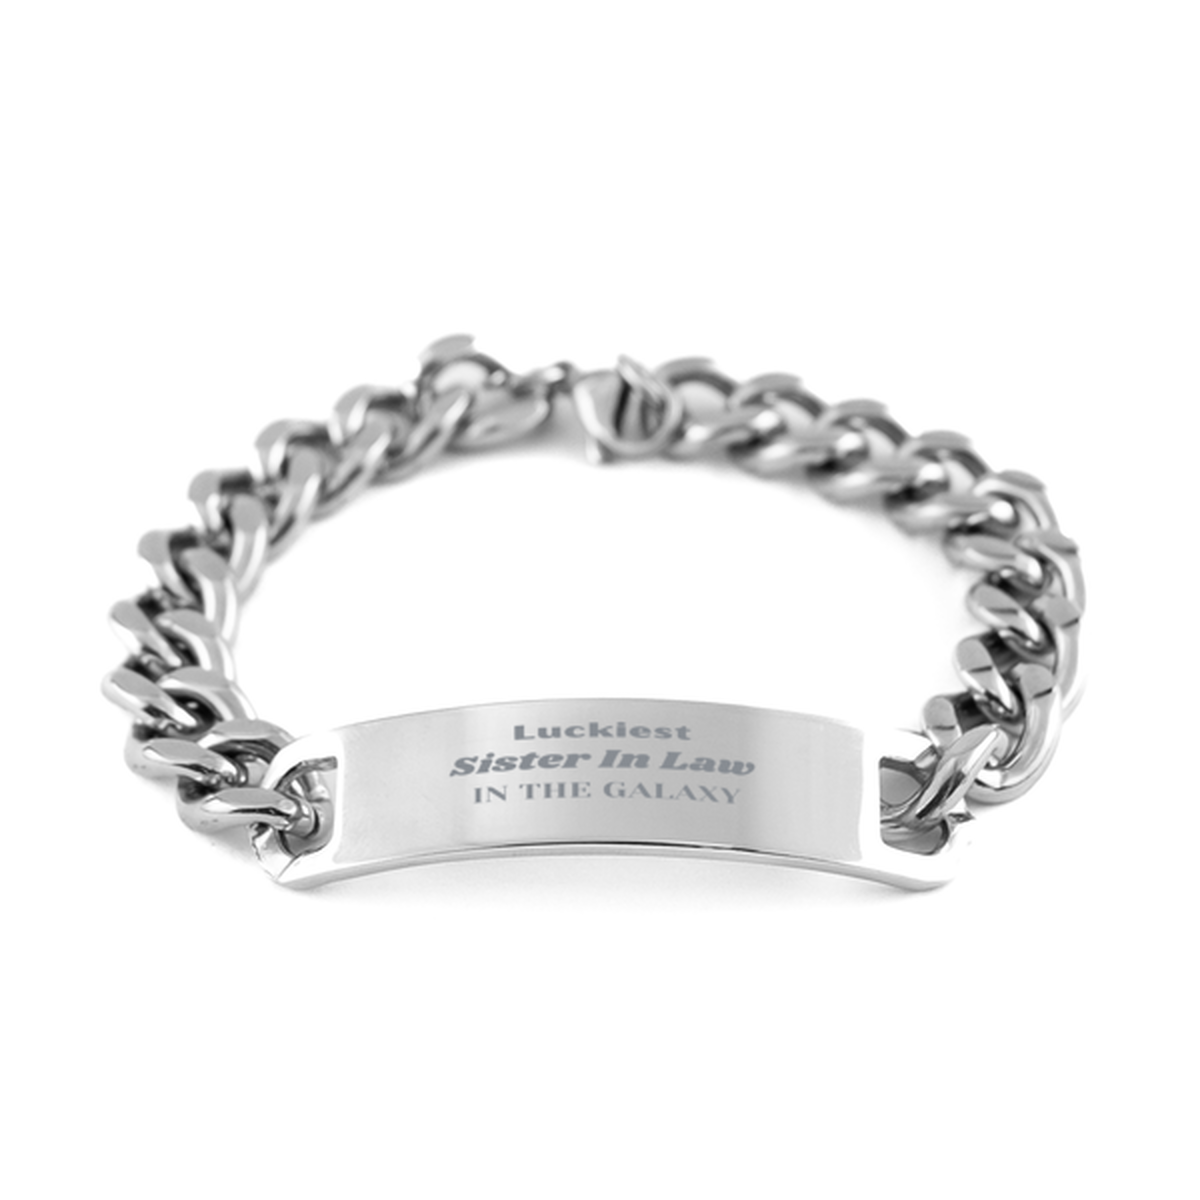 Luckiest Sister In Law in the Galaxy, To My Sister In Law Engraved Gifts, Christmas Sister In Law Cuban Chain Stainless Steel Bracelet Gifts, X-mas Birthday Unique Gifts For Sister In Law Men Women